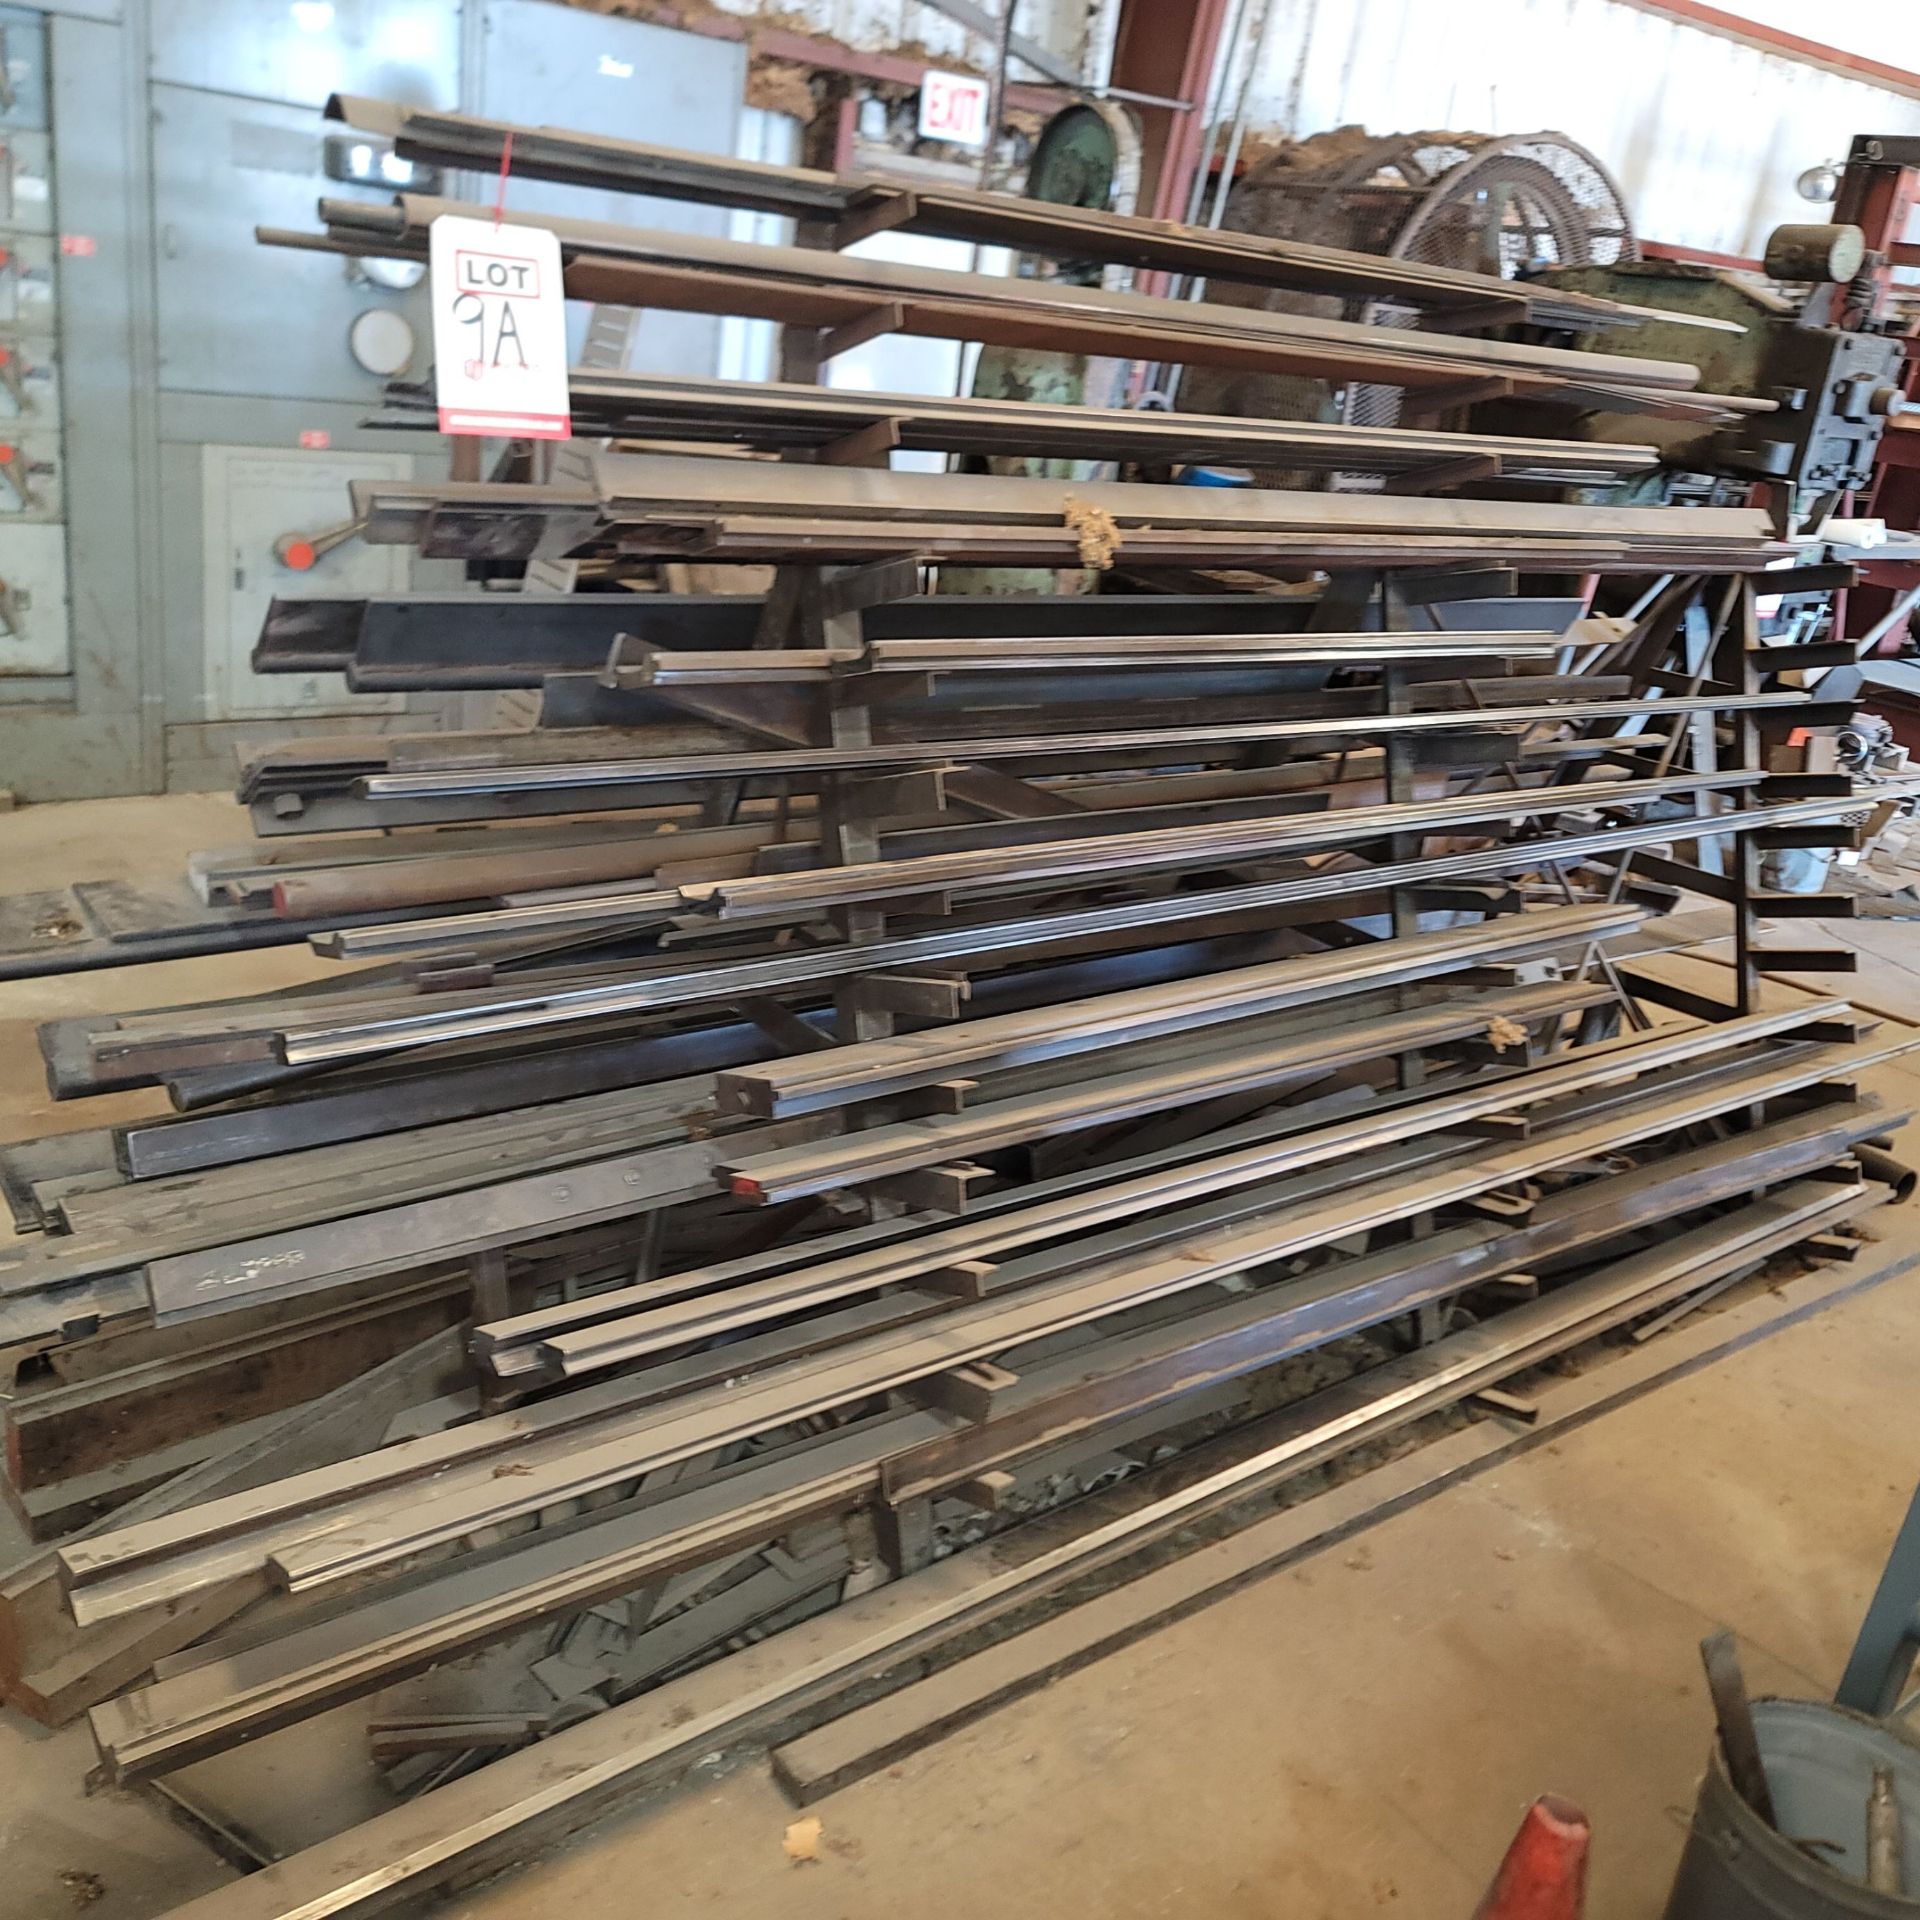 DOUBLE-SIDED RACK, W/ CONTENTS OF PRESS BRAKE DIES, FROM 4' TO 12-1/2' - Image 2 of 4